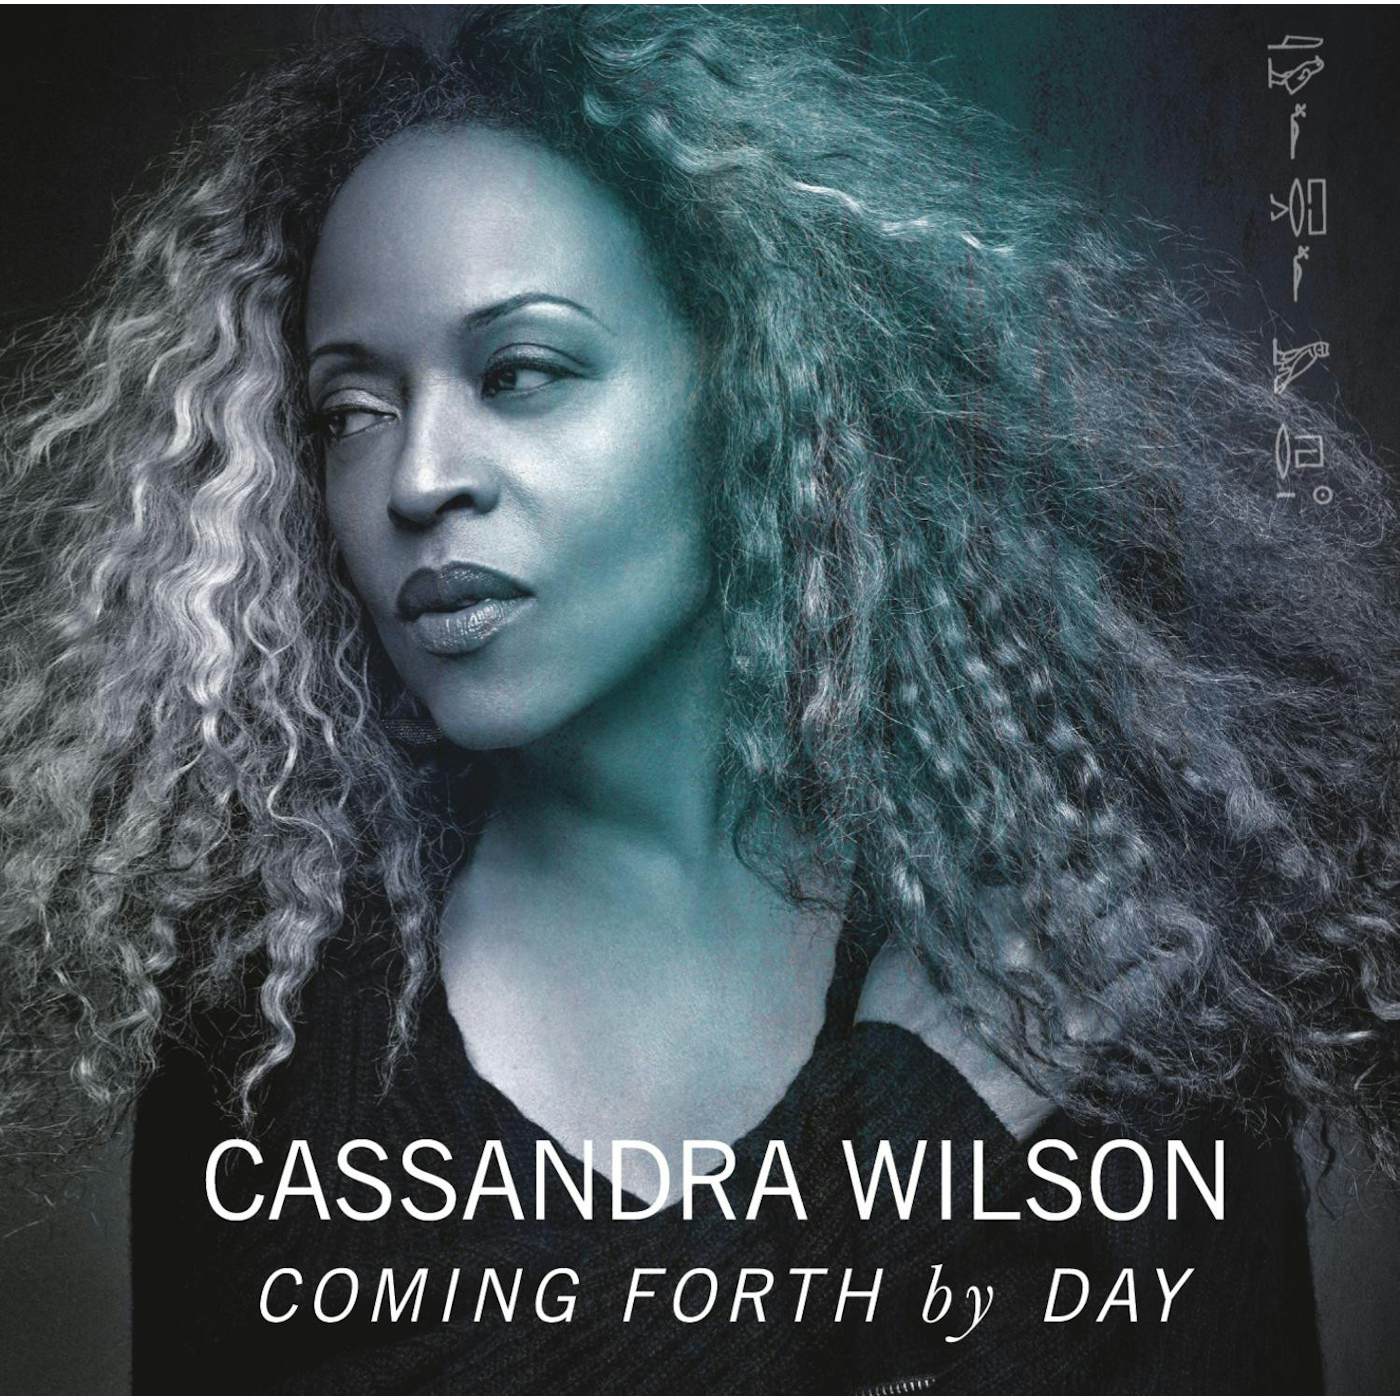 Cassandra Wilson Coming Forth by Day Vinyl Record